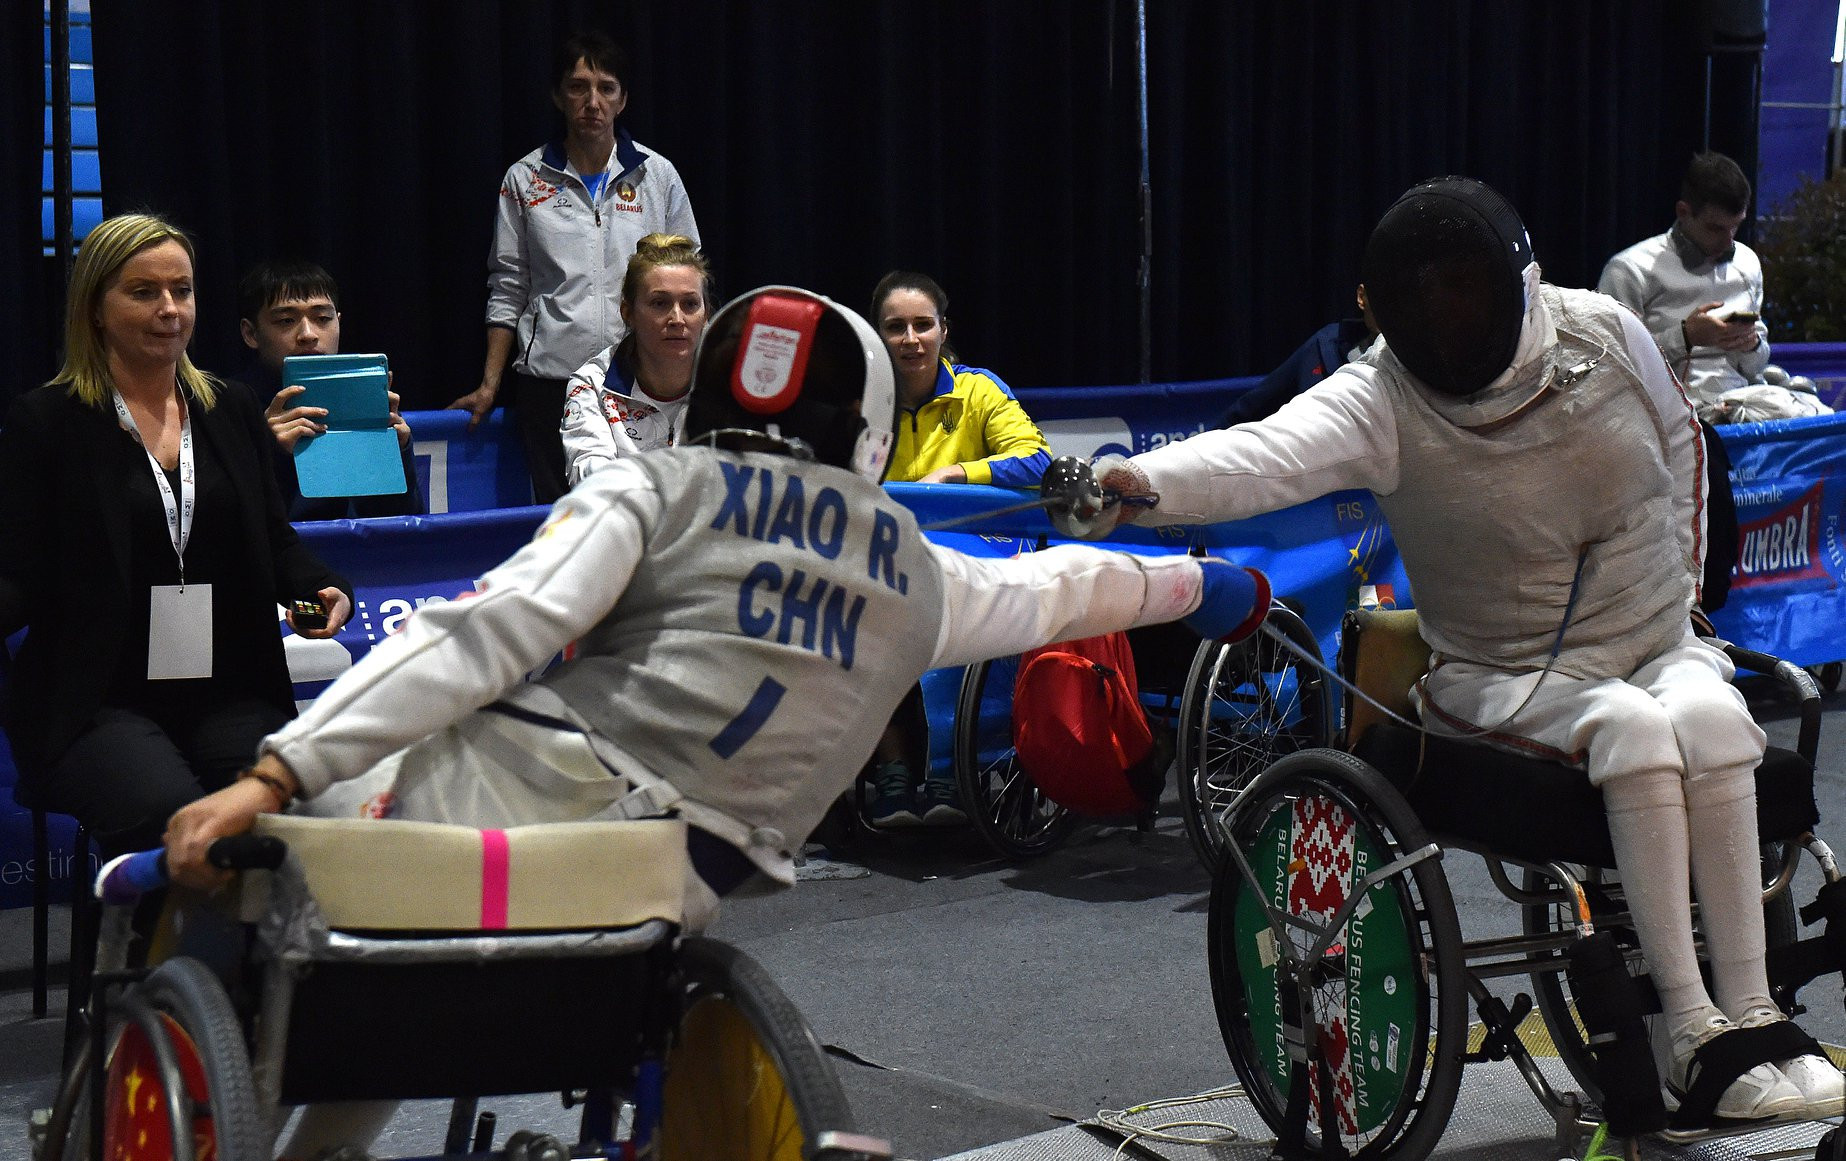 China won the men's foil team event at the IWAS Wheelchair Fencing World Cup in Pisa ©Facebook